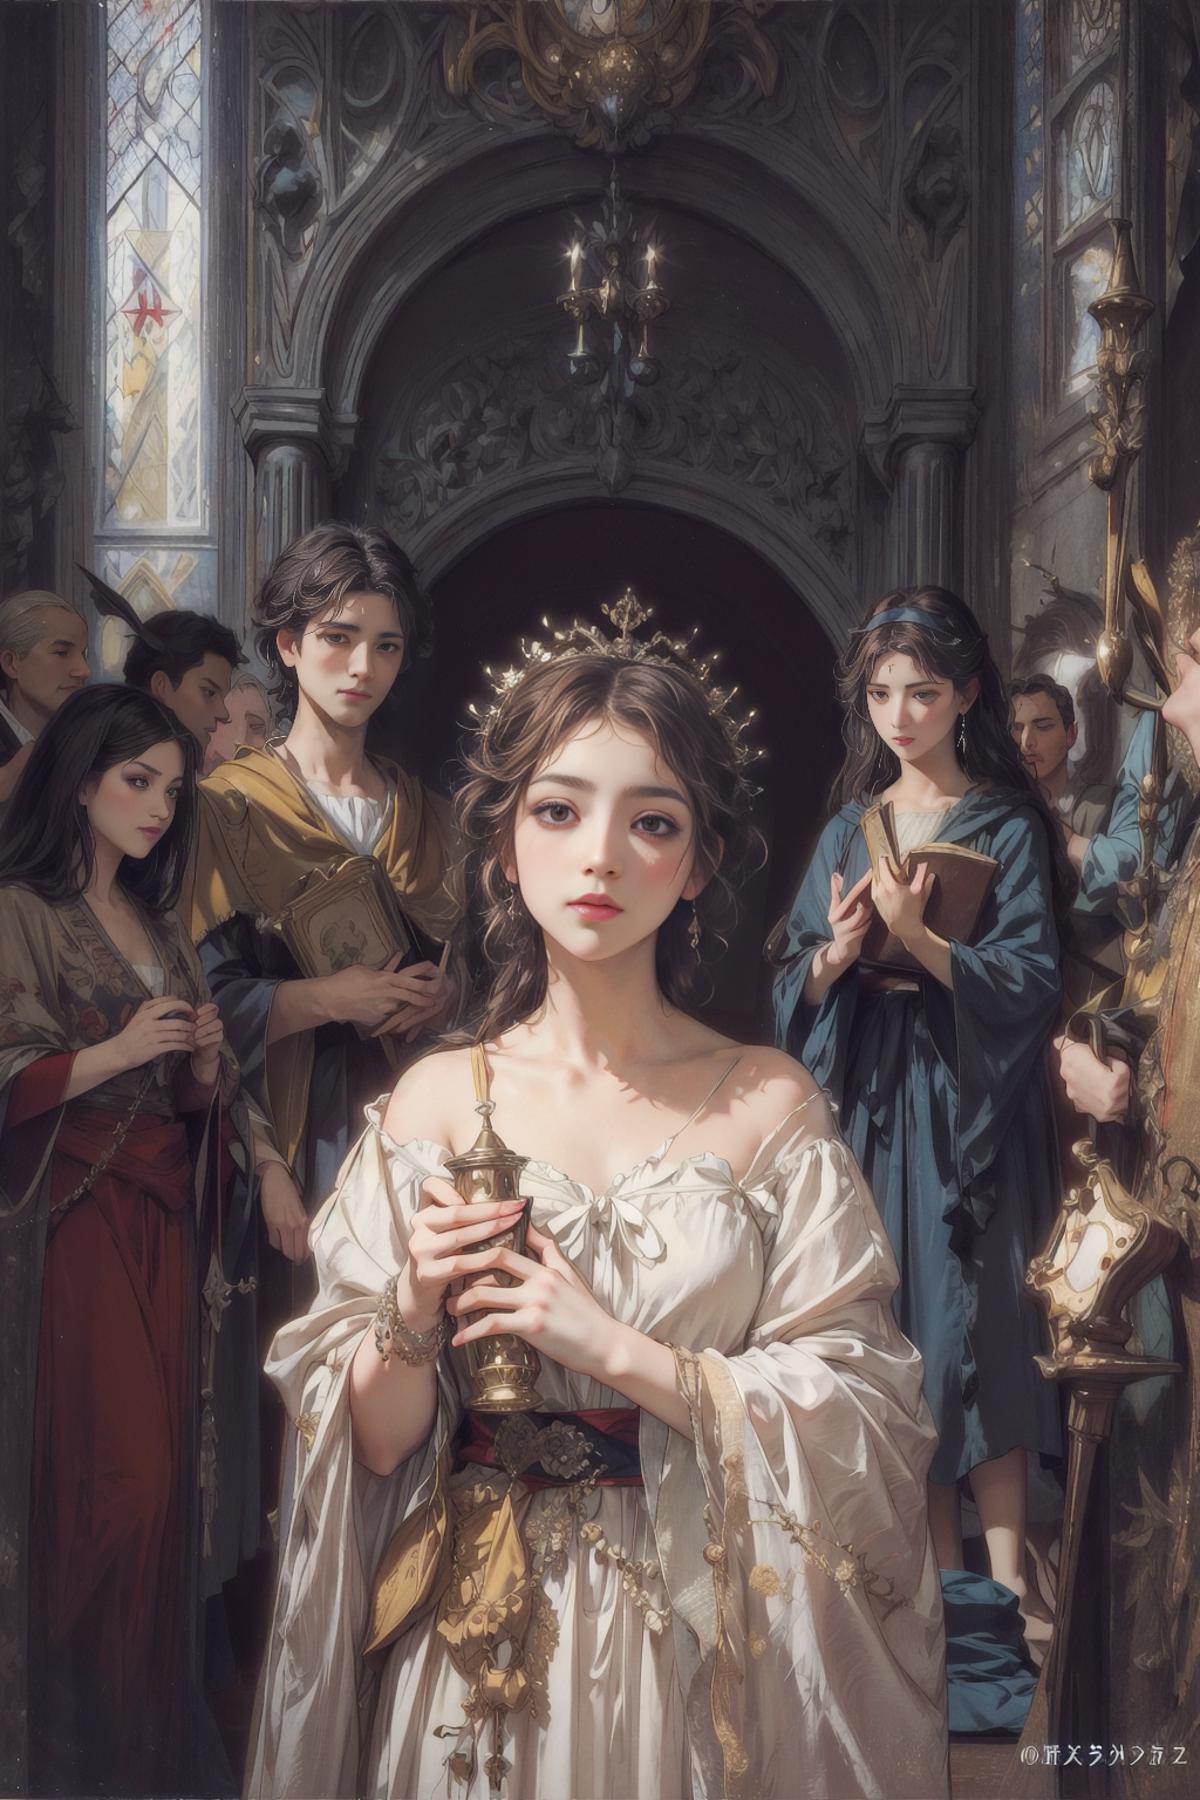 An Asian girl with a crown and a book is surrounded by people.